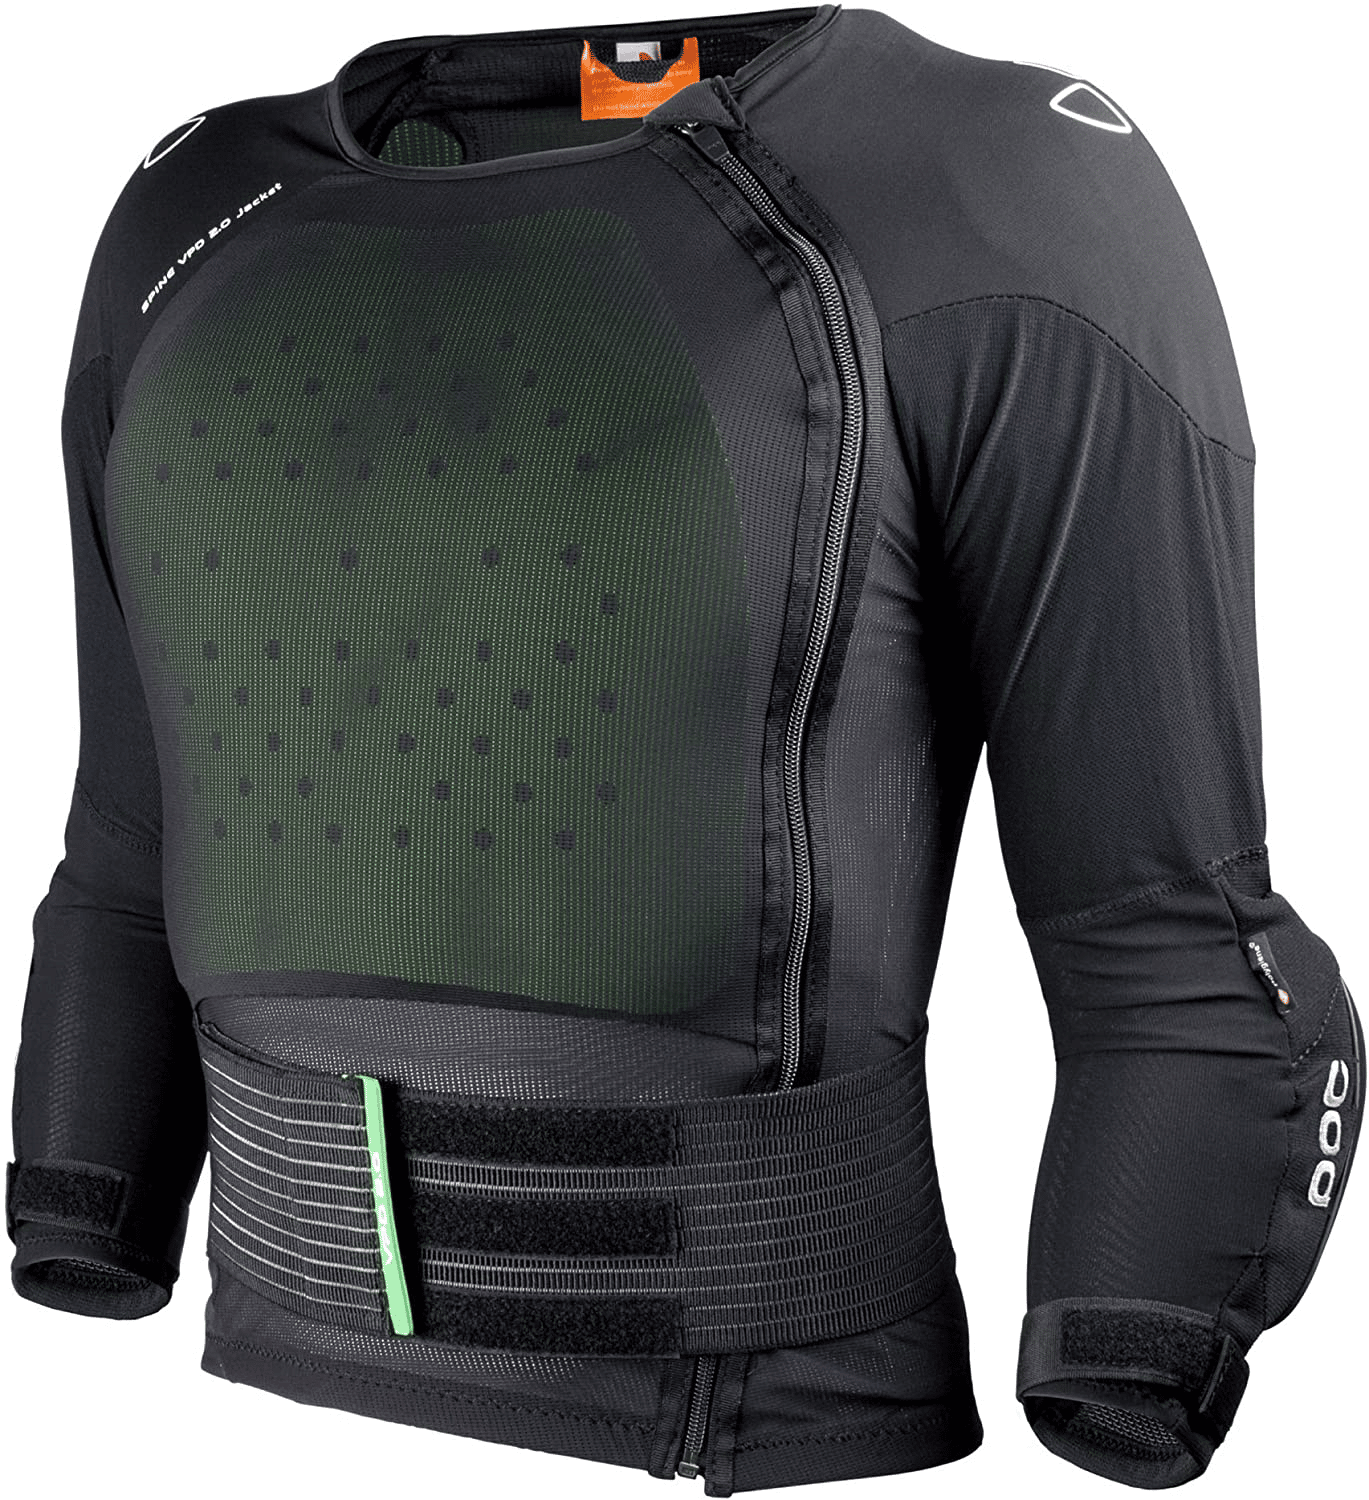 Mountain bike armor durability depends on the damage to the armor and the quality of the armor. Most chest and back protectors can last up to 5 years without any damage and must be replaced after an accident.